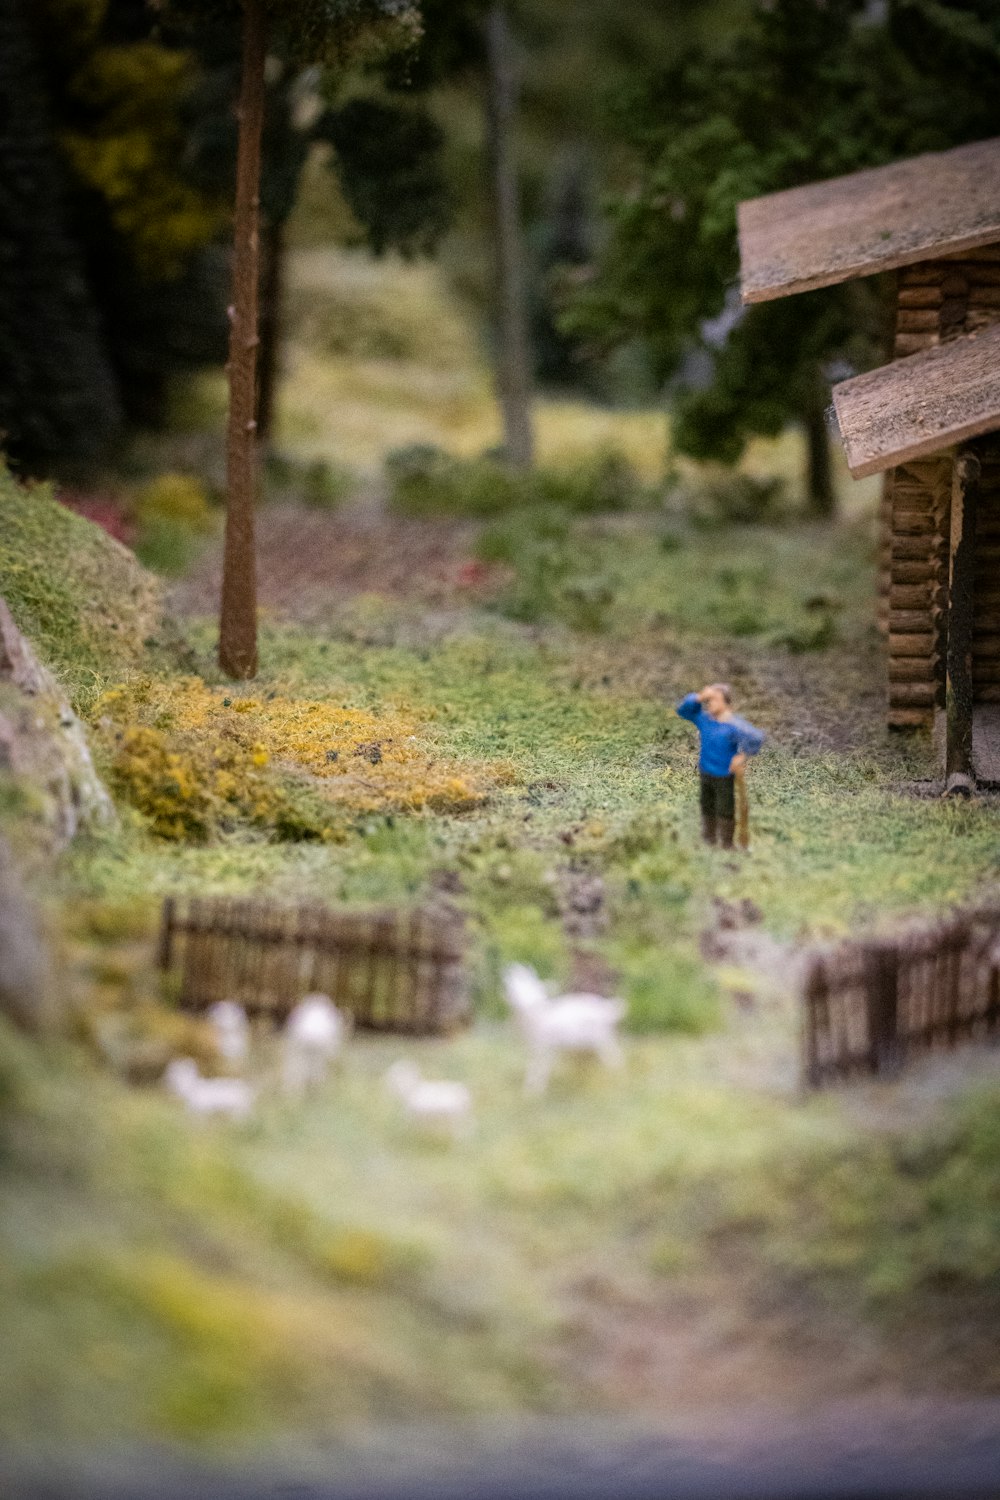 a miniature scene of a person standing in the grass